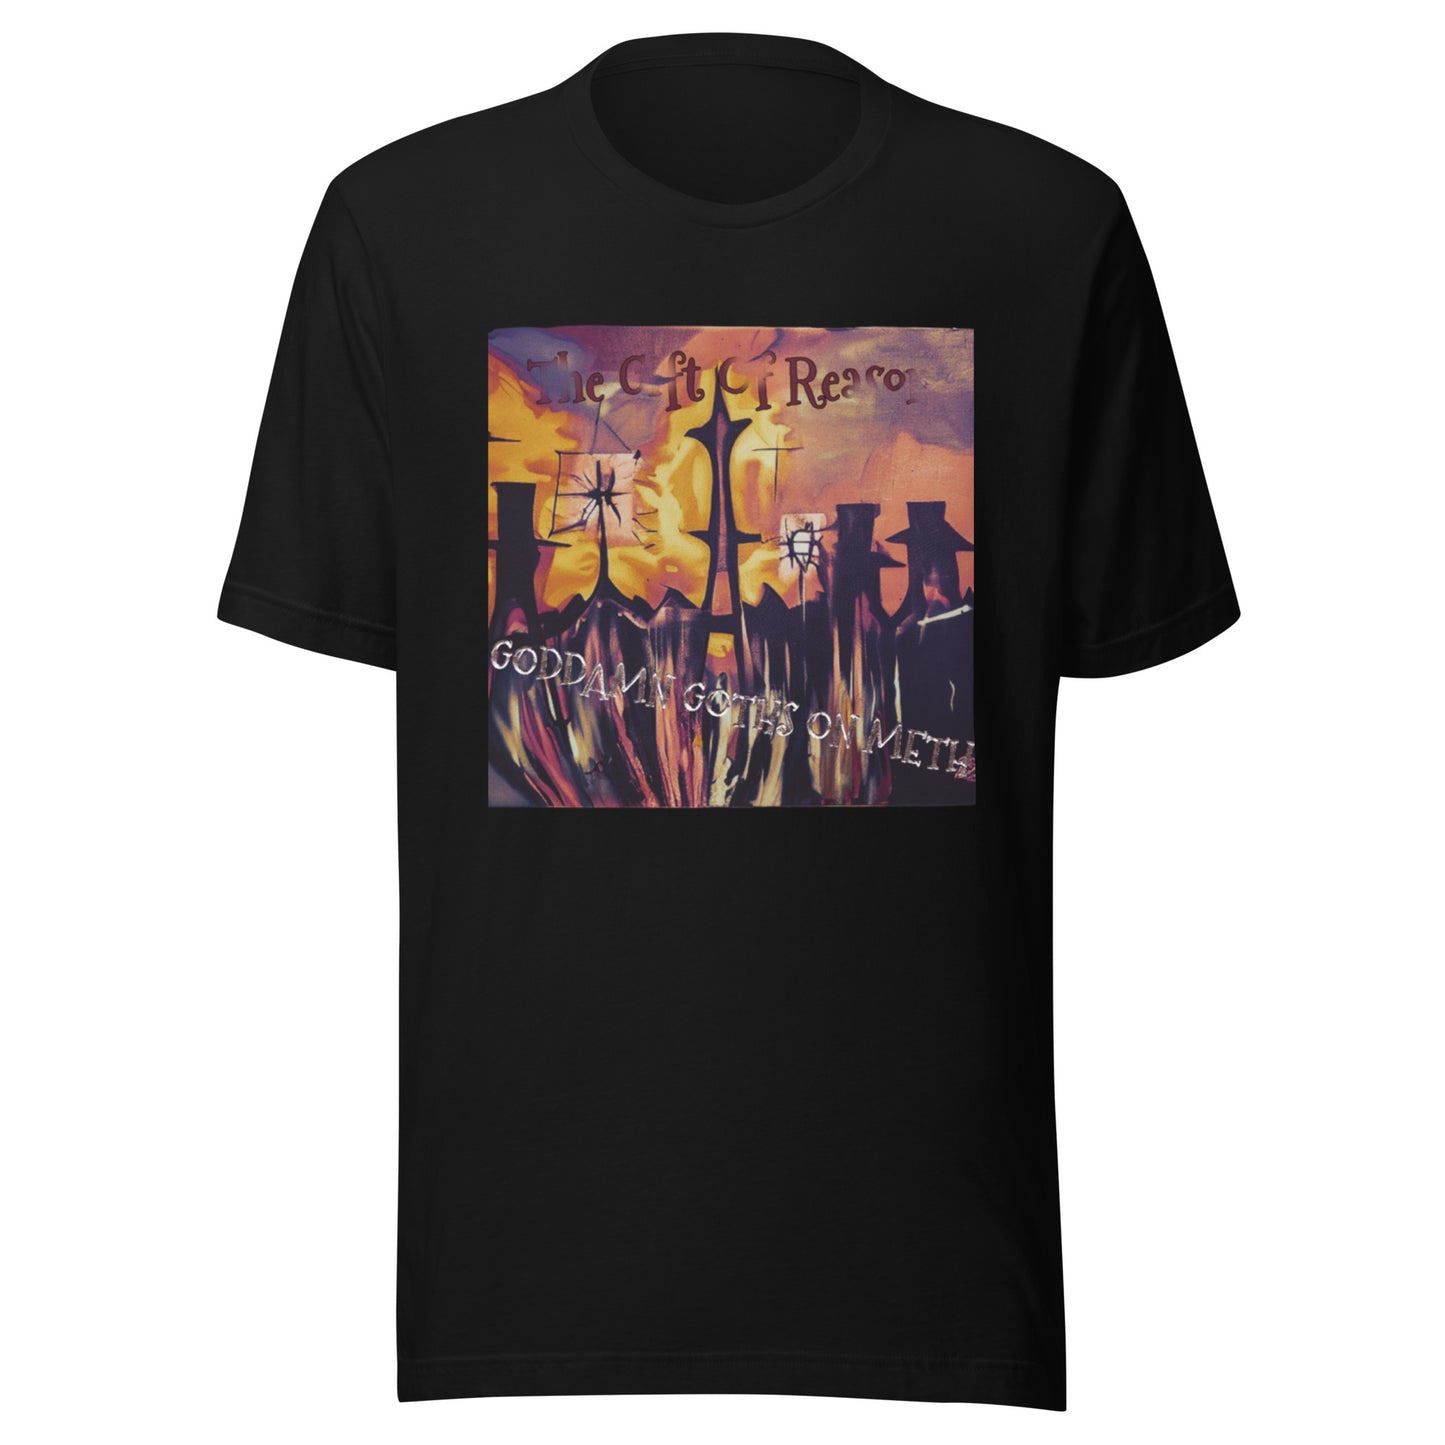 Gift Of Reason (THE STRIP) Unisex t-shirt